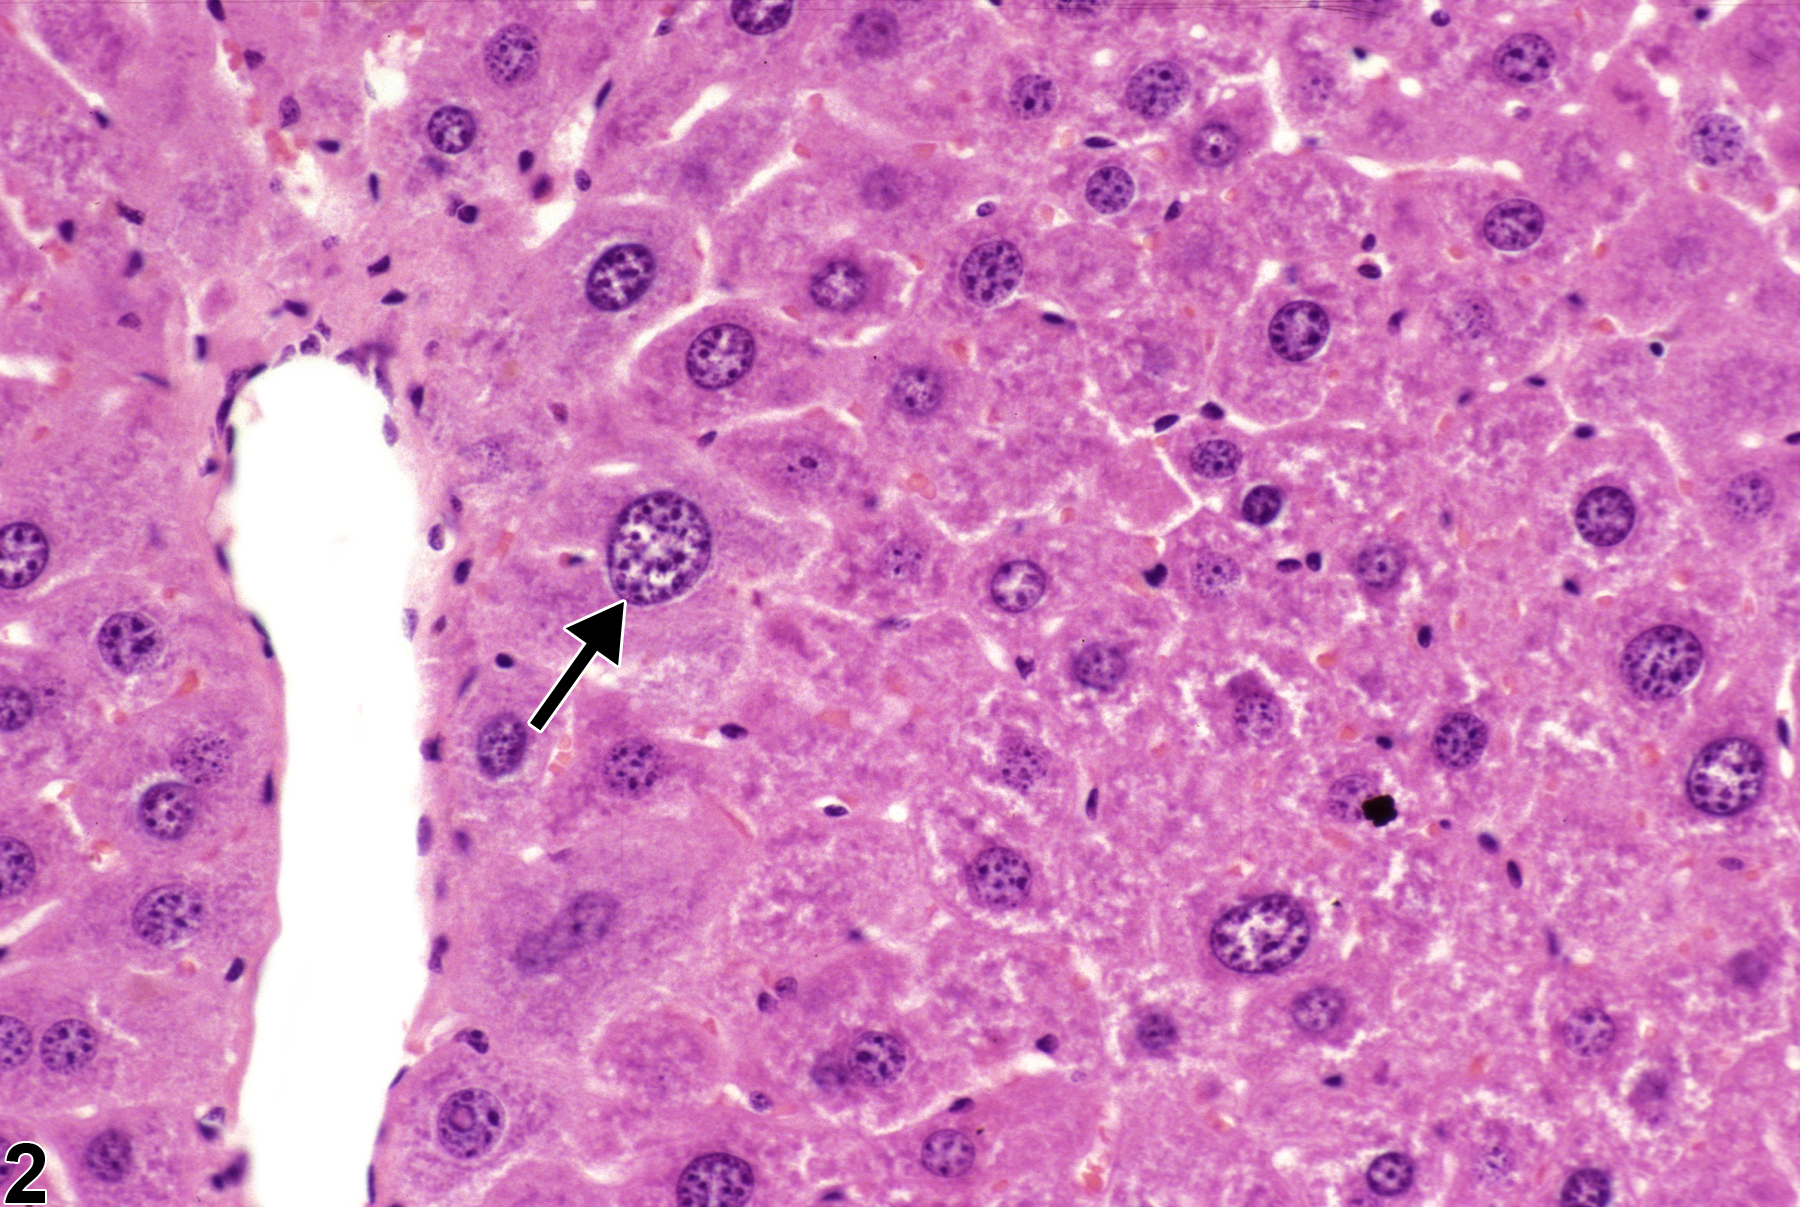 Image of karyomegaly in the liver from a male  B6C3F1 mouse in a subchronic study